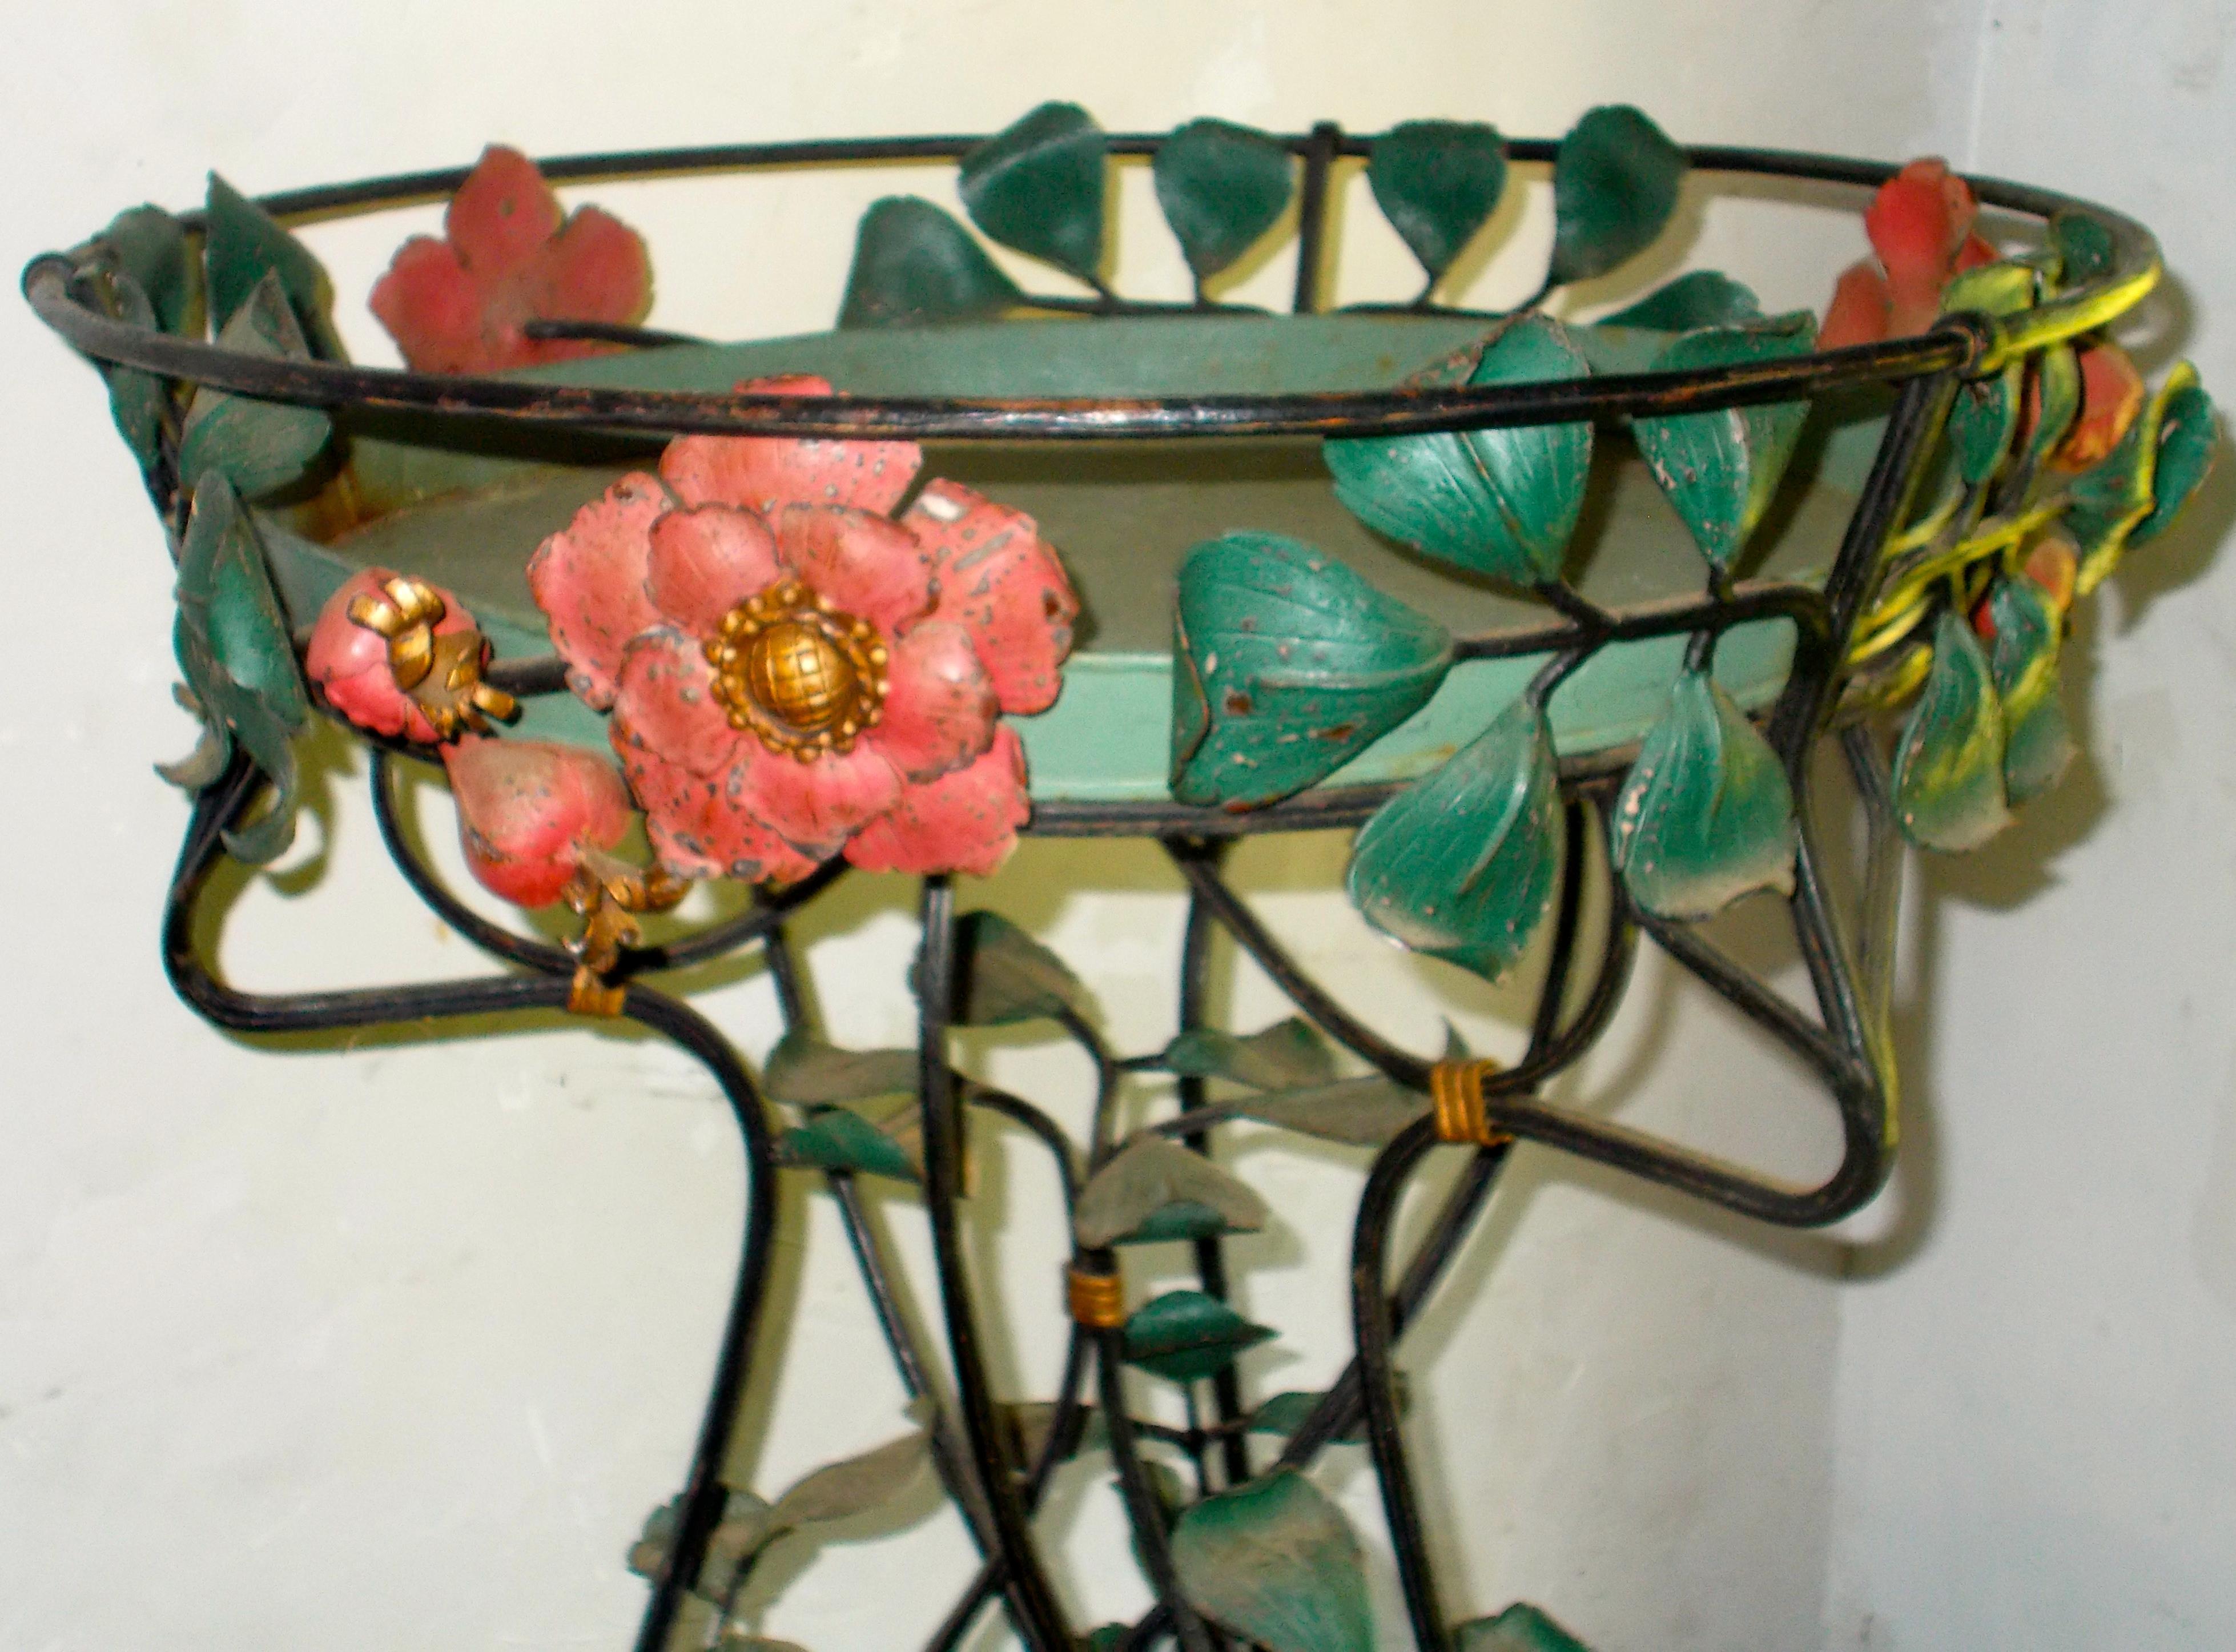  French Art Nouveau Painted Wrought Iron Botanical Fantasy Ferneries Planter For Sale 4